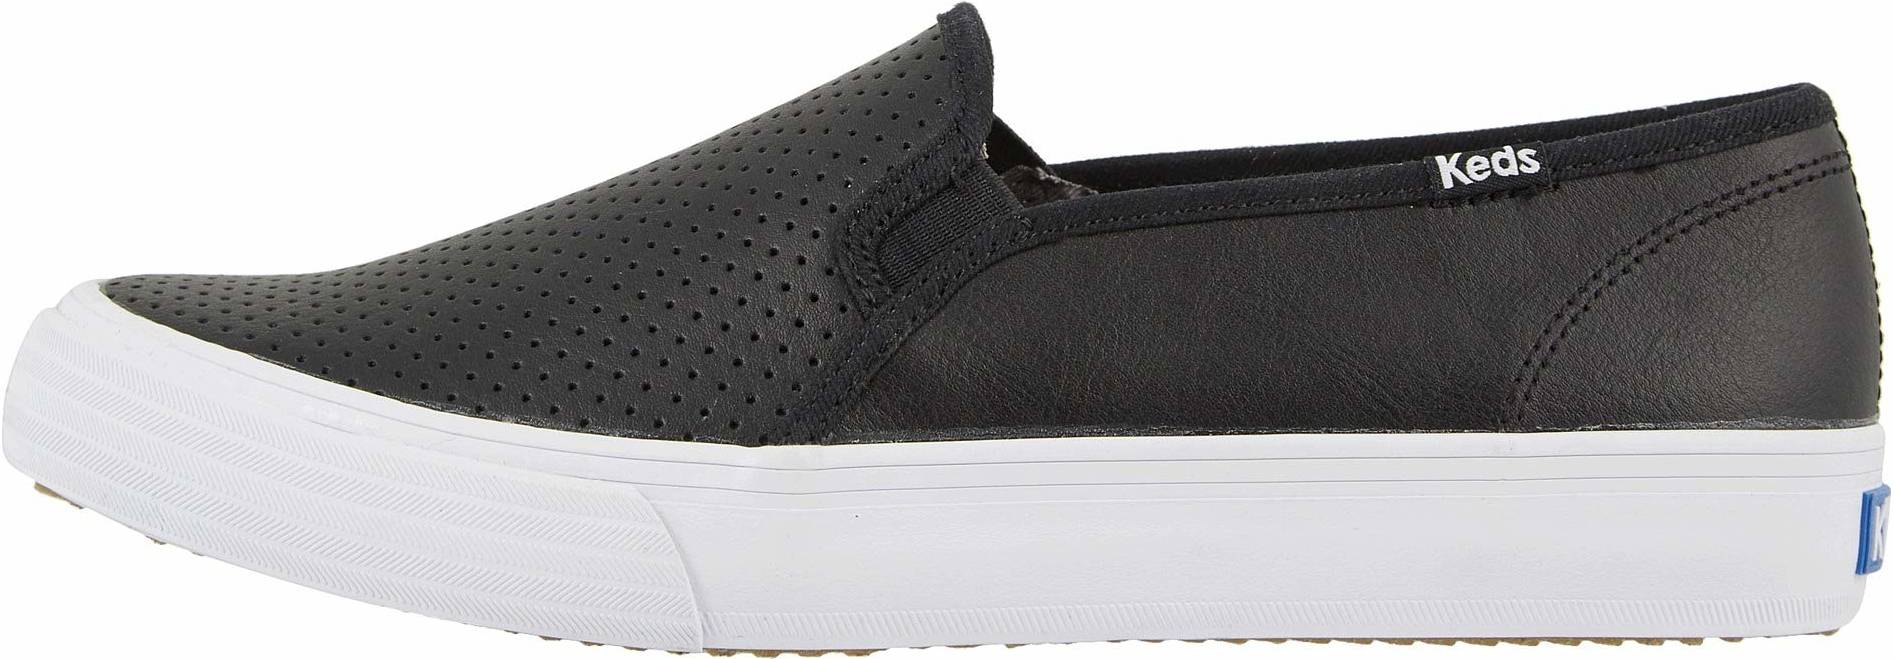 Save 29% on Black Keds Sneakers (41 